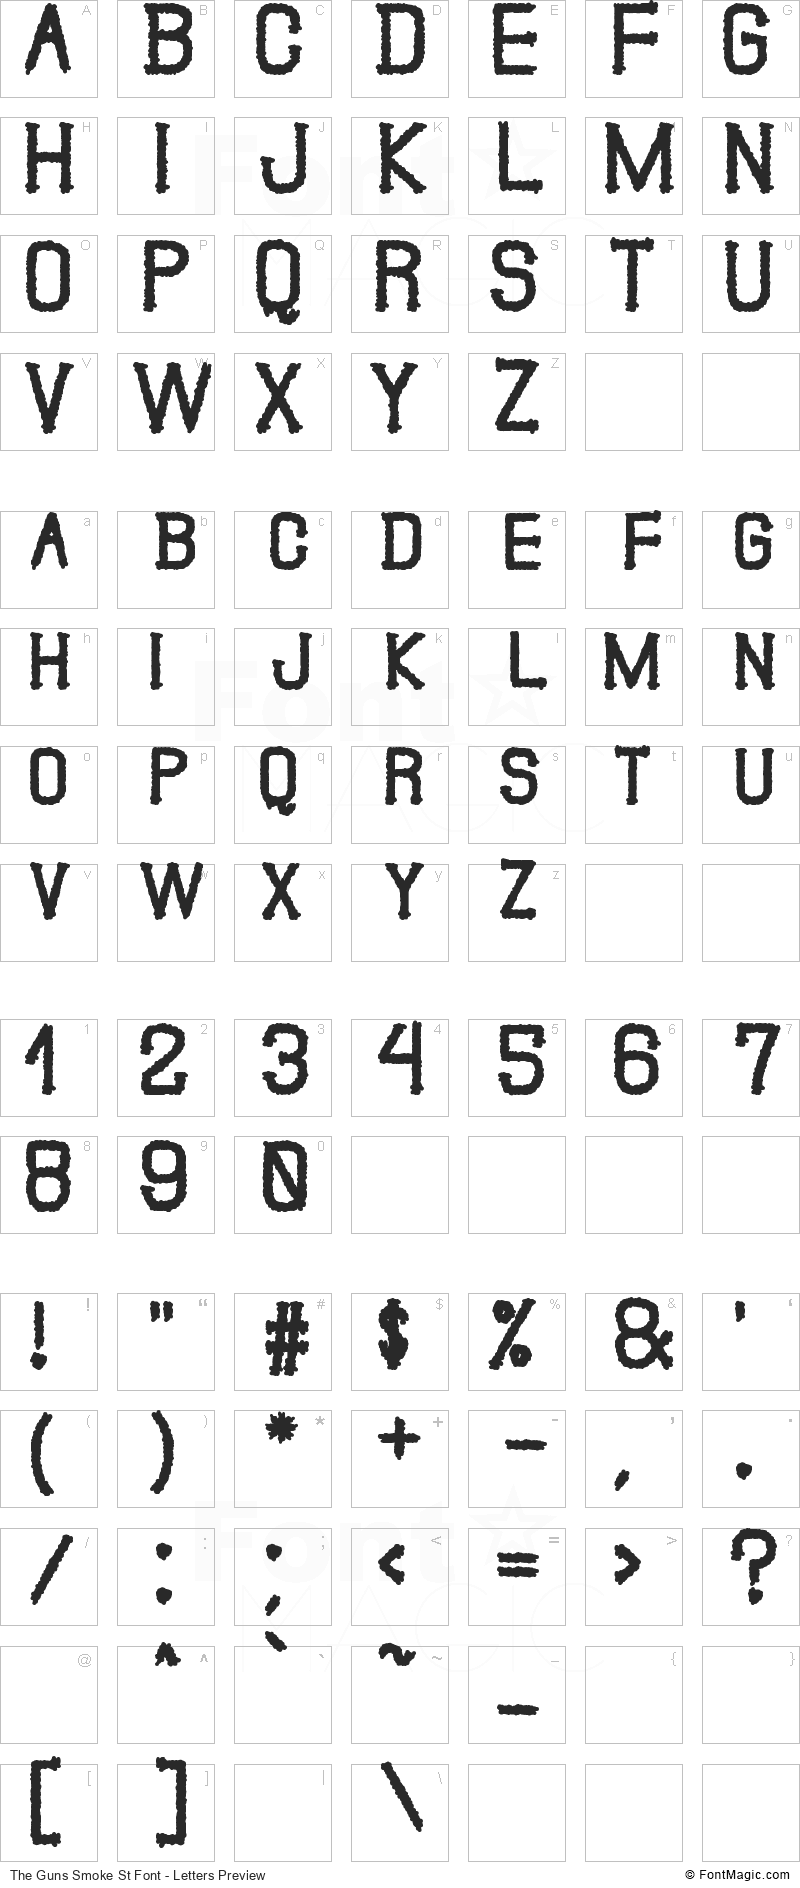 The Guns Smoke St Font - All Latters Preview Chart